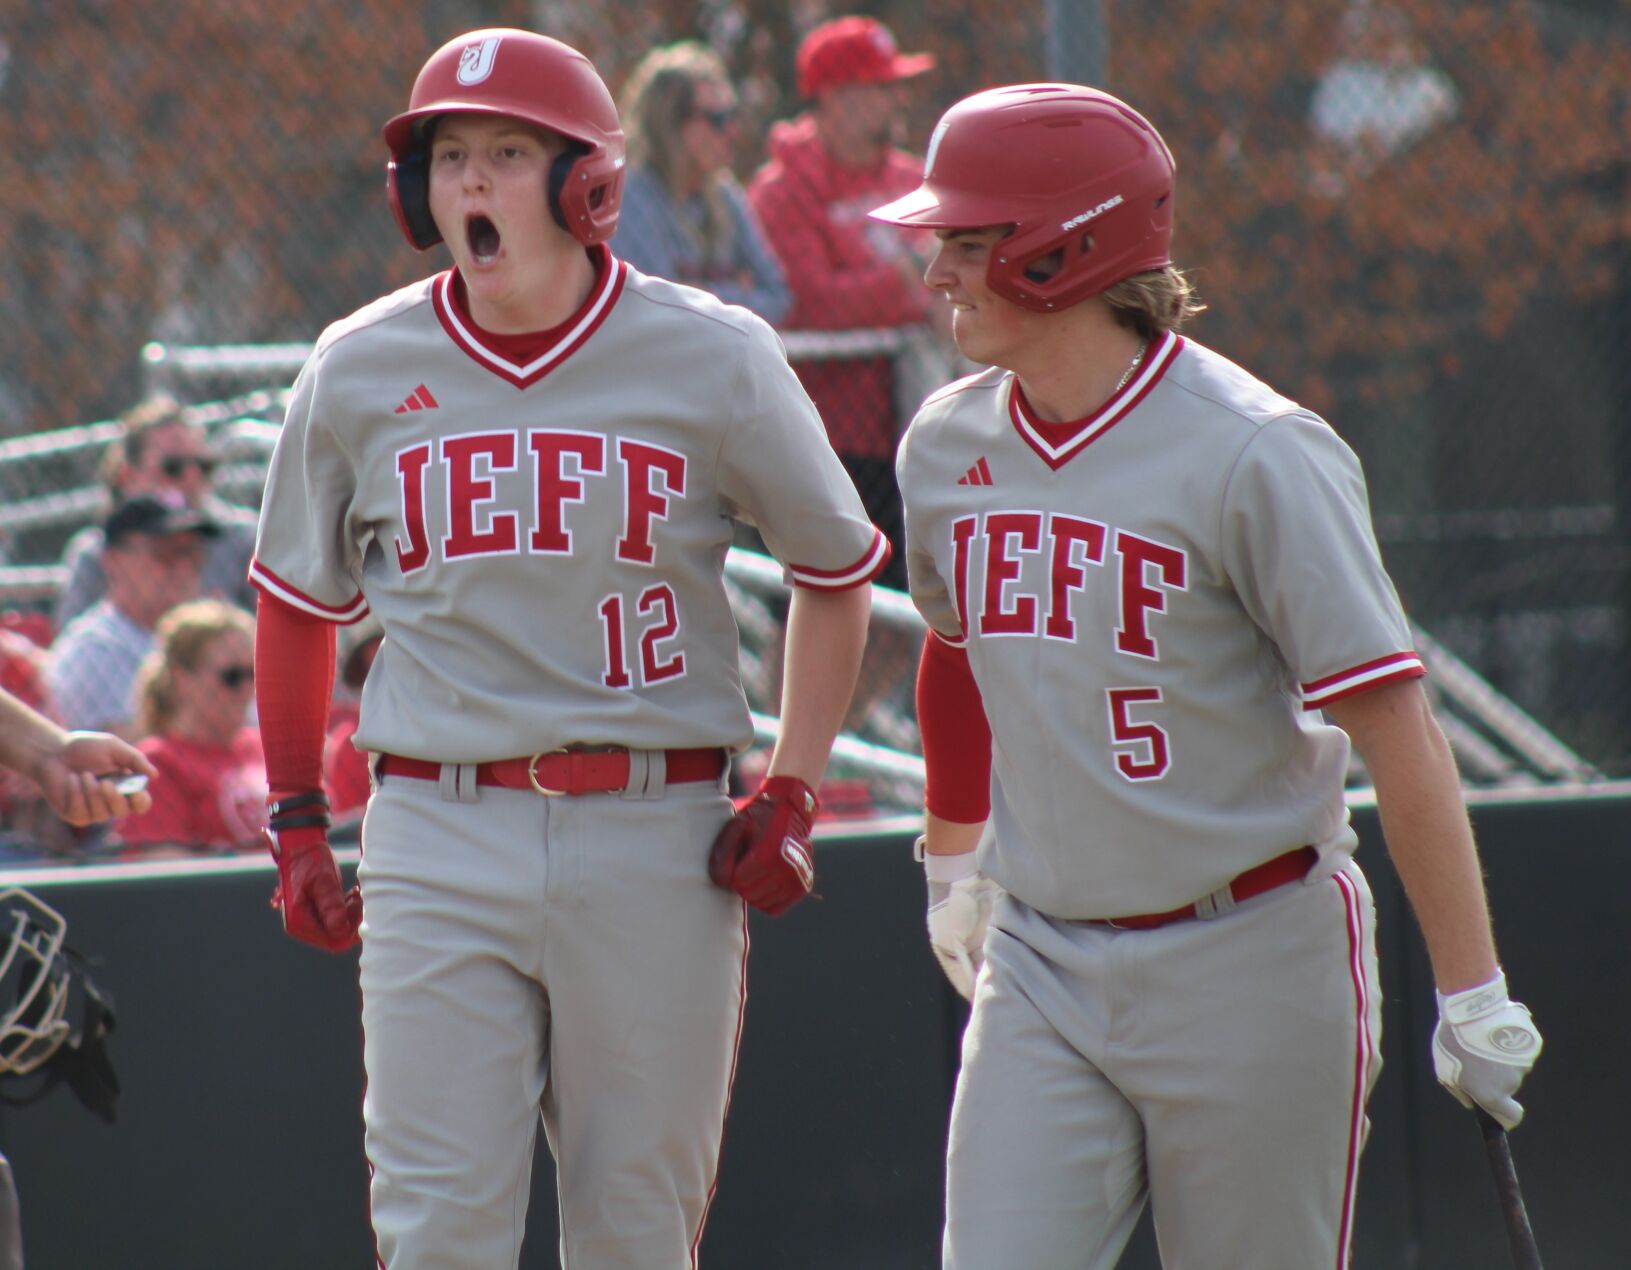 Jeffersonville Red Devils Dominate in Doubleheader Sweep: Crawford Shines, Jaggers Hits a Home Run